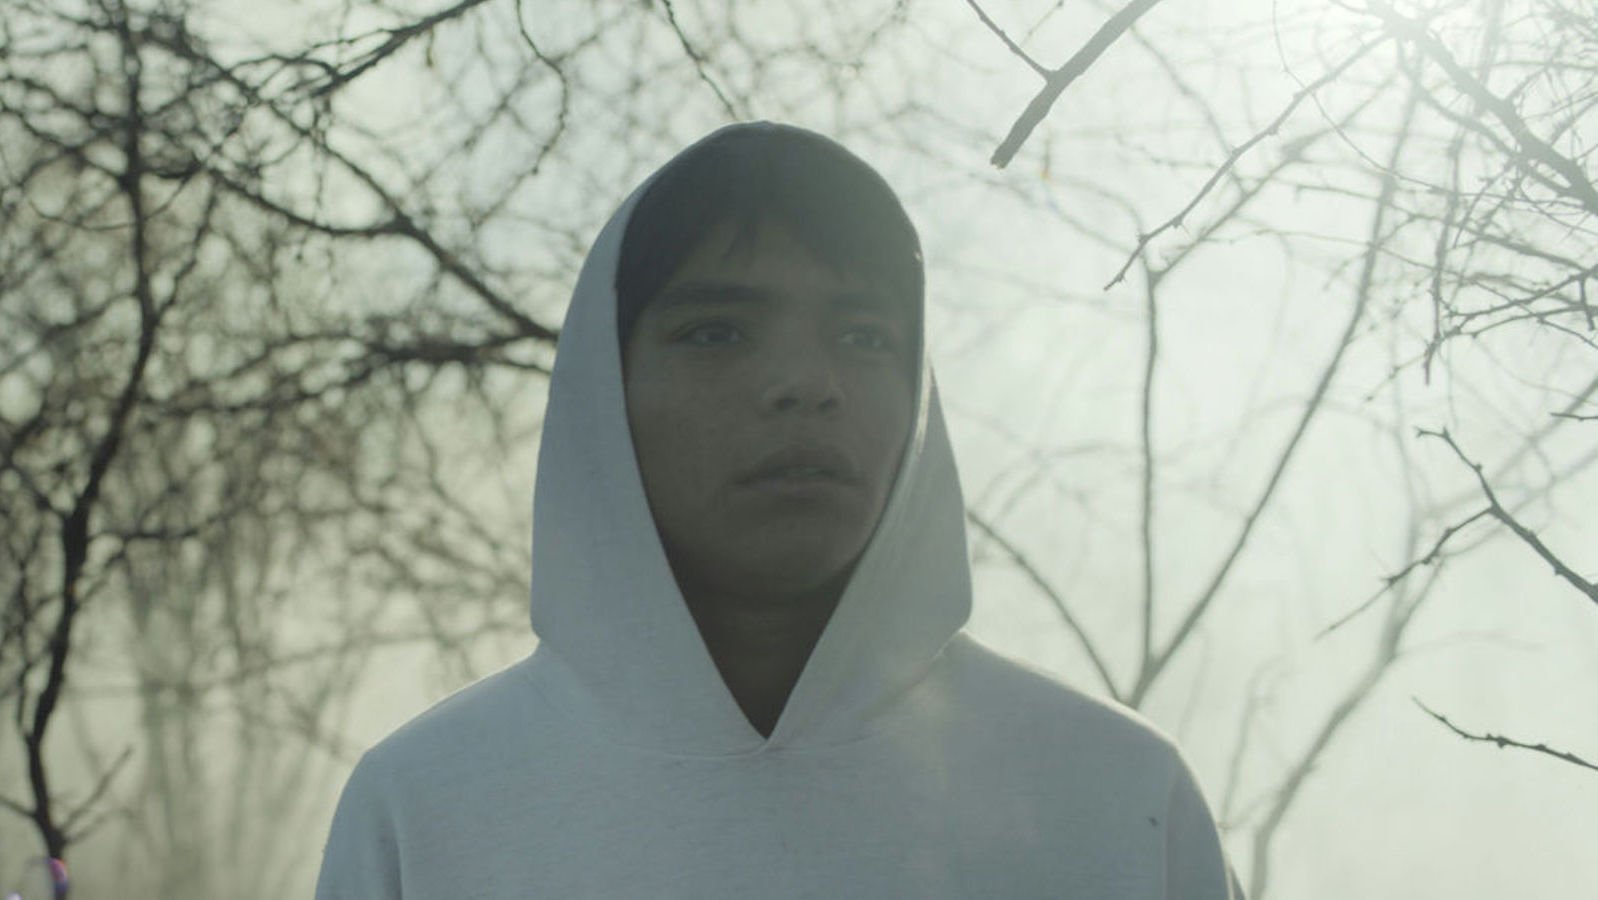 A teenage boy in a hooded white sweatshirt stands in a forest surrounded by bare tree branches, looking off camera concerned